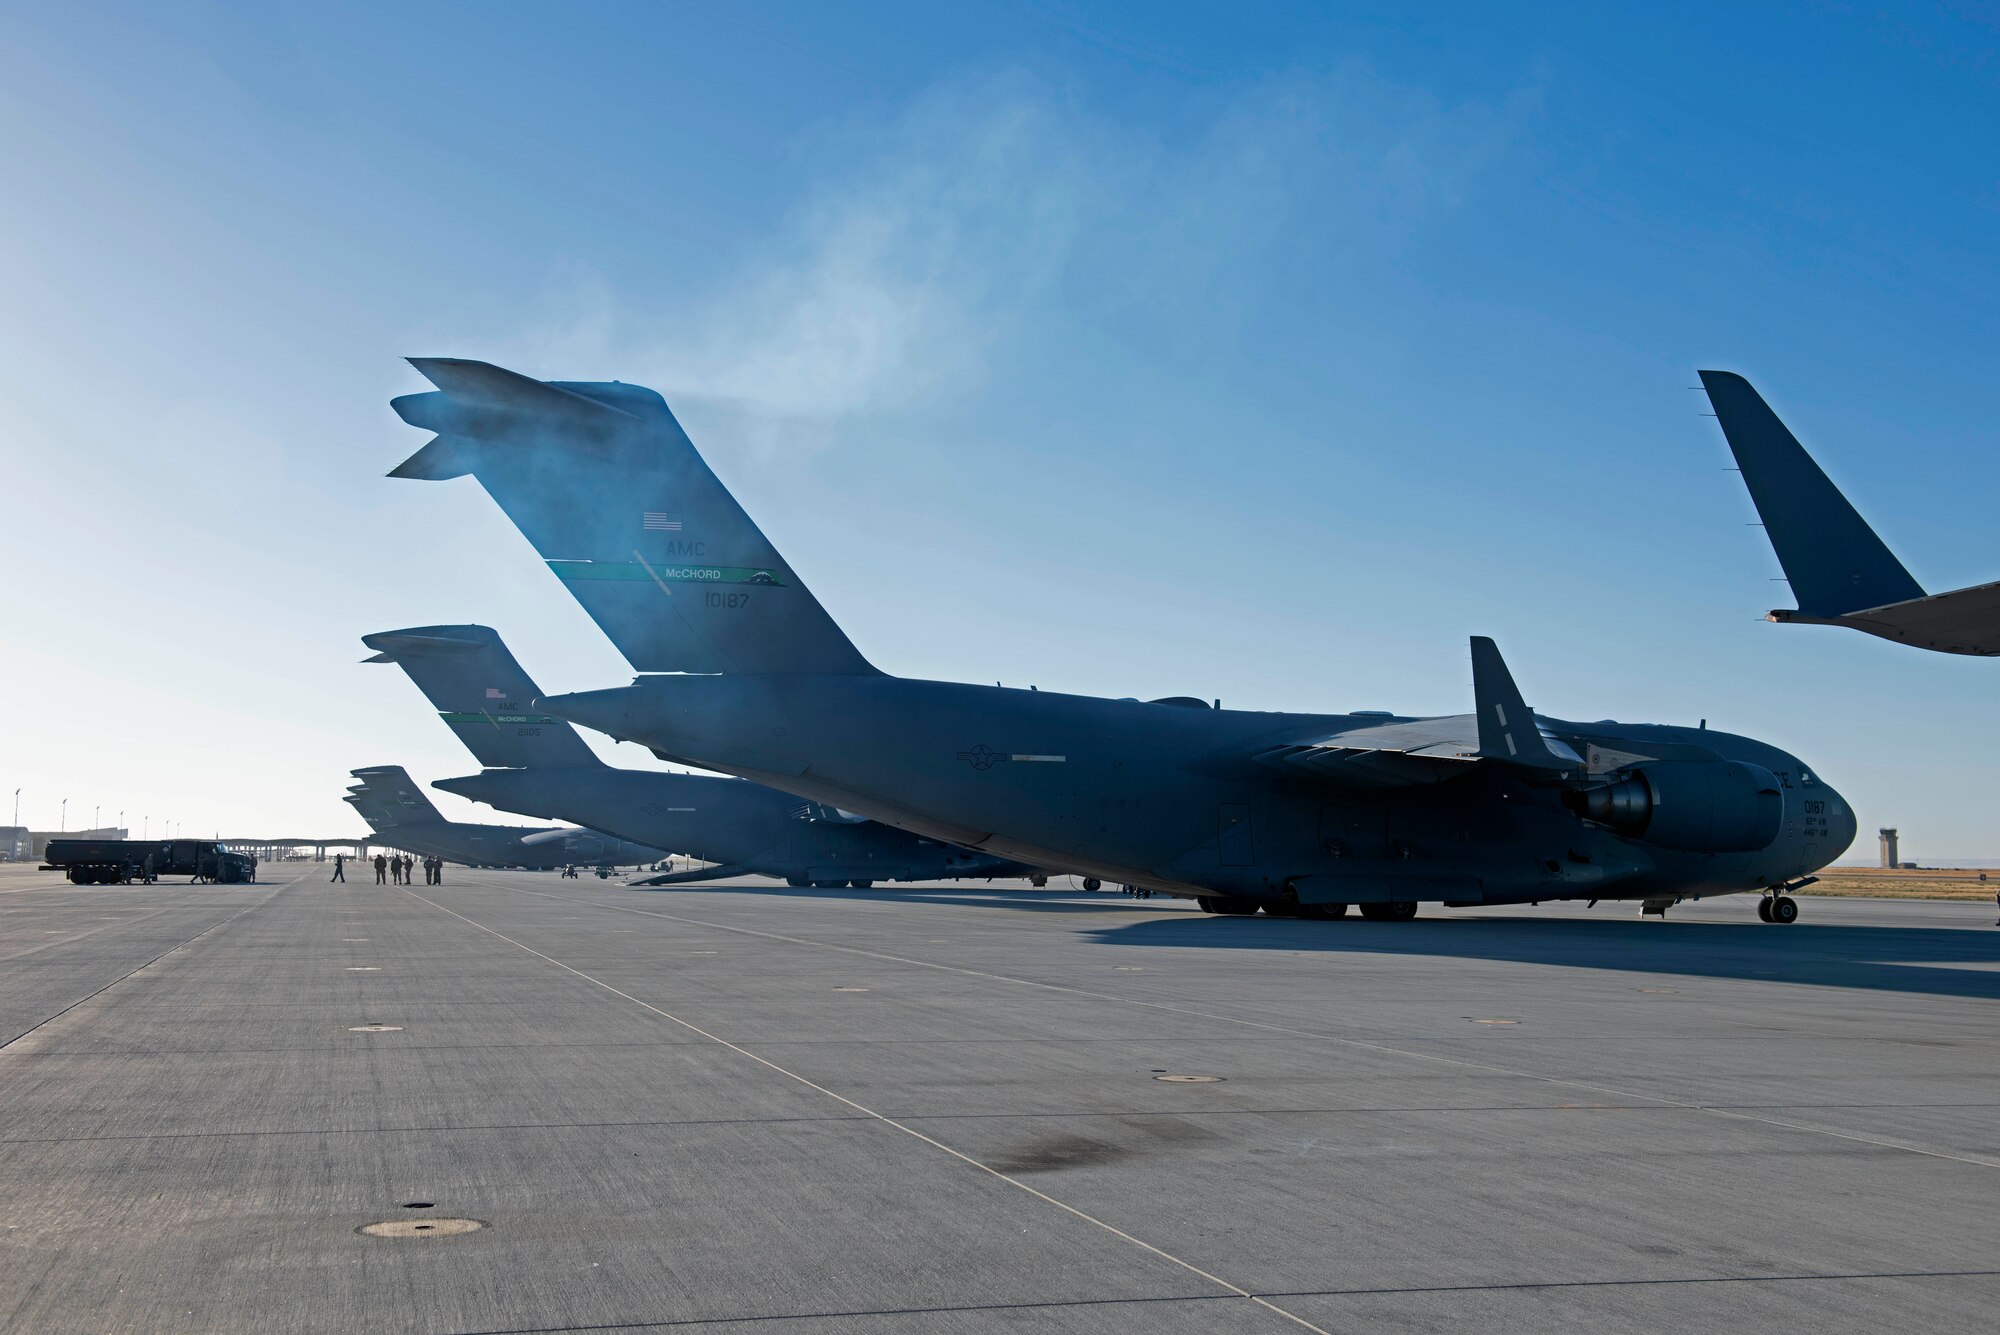 A fuel truck is being prepared to be loaded onto a C-17 Globemaster III aircraft during Exercise Rainier War 22B at Mountain Home Air Force Base, Idaho, Oct. 17, 2022. Rainier War is a semi-annual exercise designed to demonstrate the 62d Airlift Wing, 627th Air Base Group and 446th Airlift Wing’s ability to generate, employ and sustain airlift operations. (U.S. Air Force photo by Staff Sgt. Zoe Thacker)